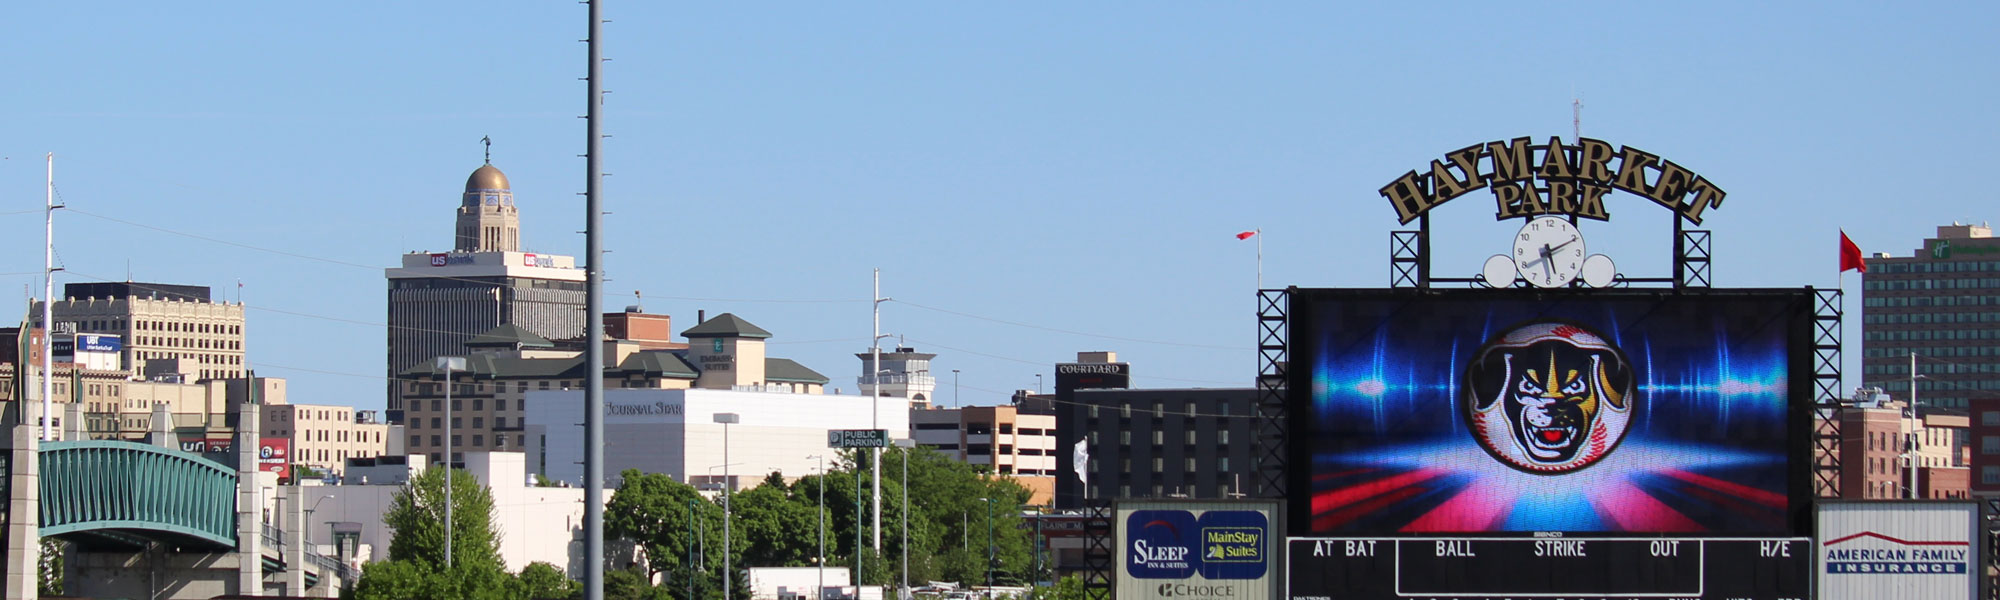 Downtown Lincoln and Scoreboard